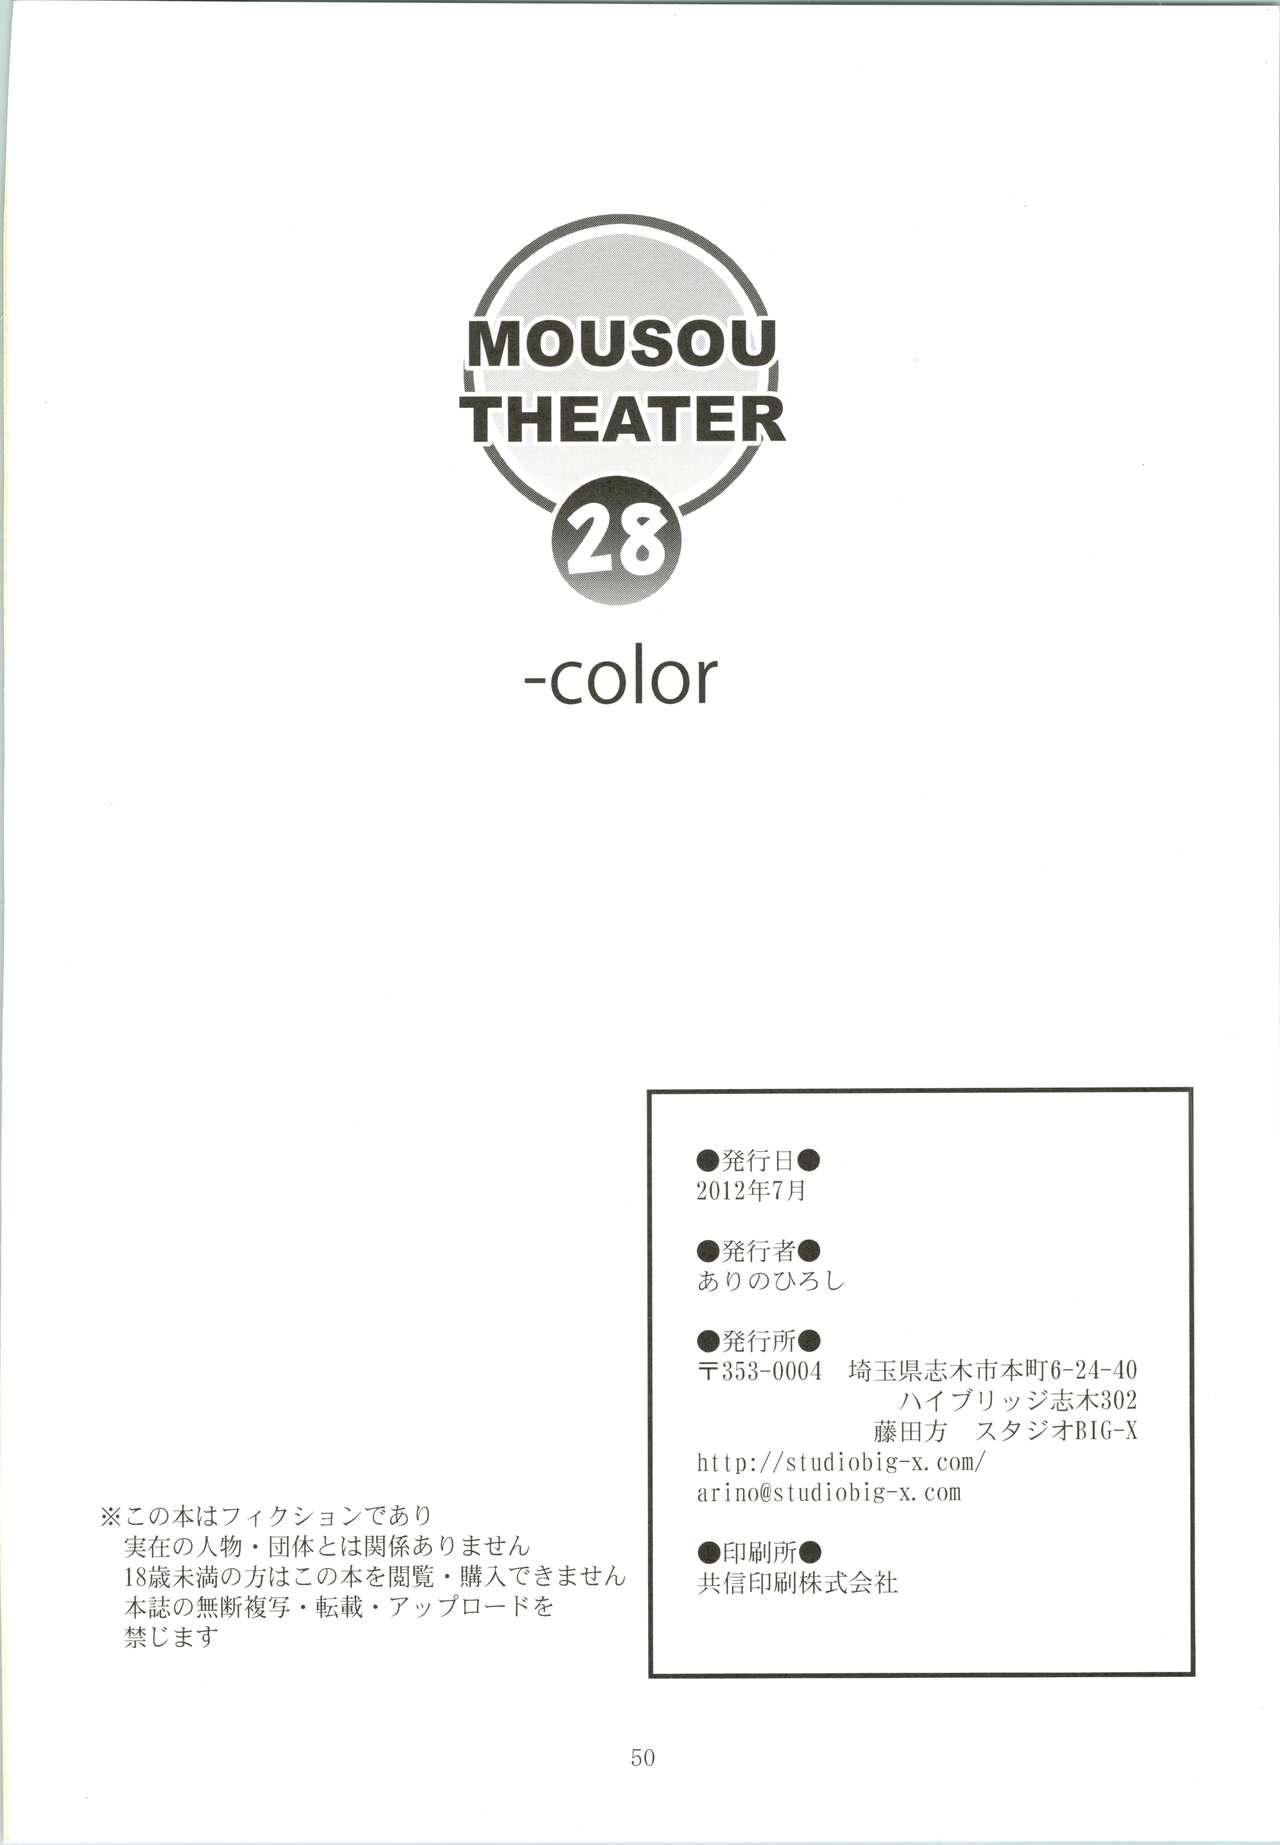 MOUSOU THEATER 28 -color 51